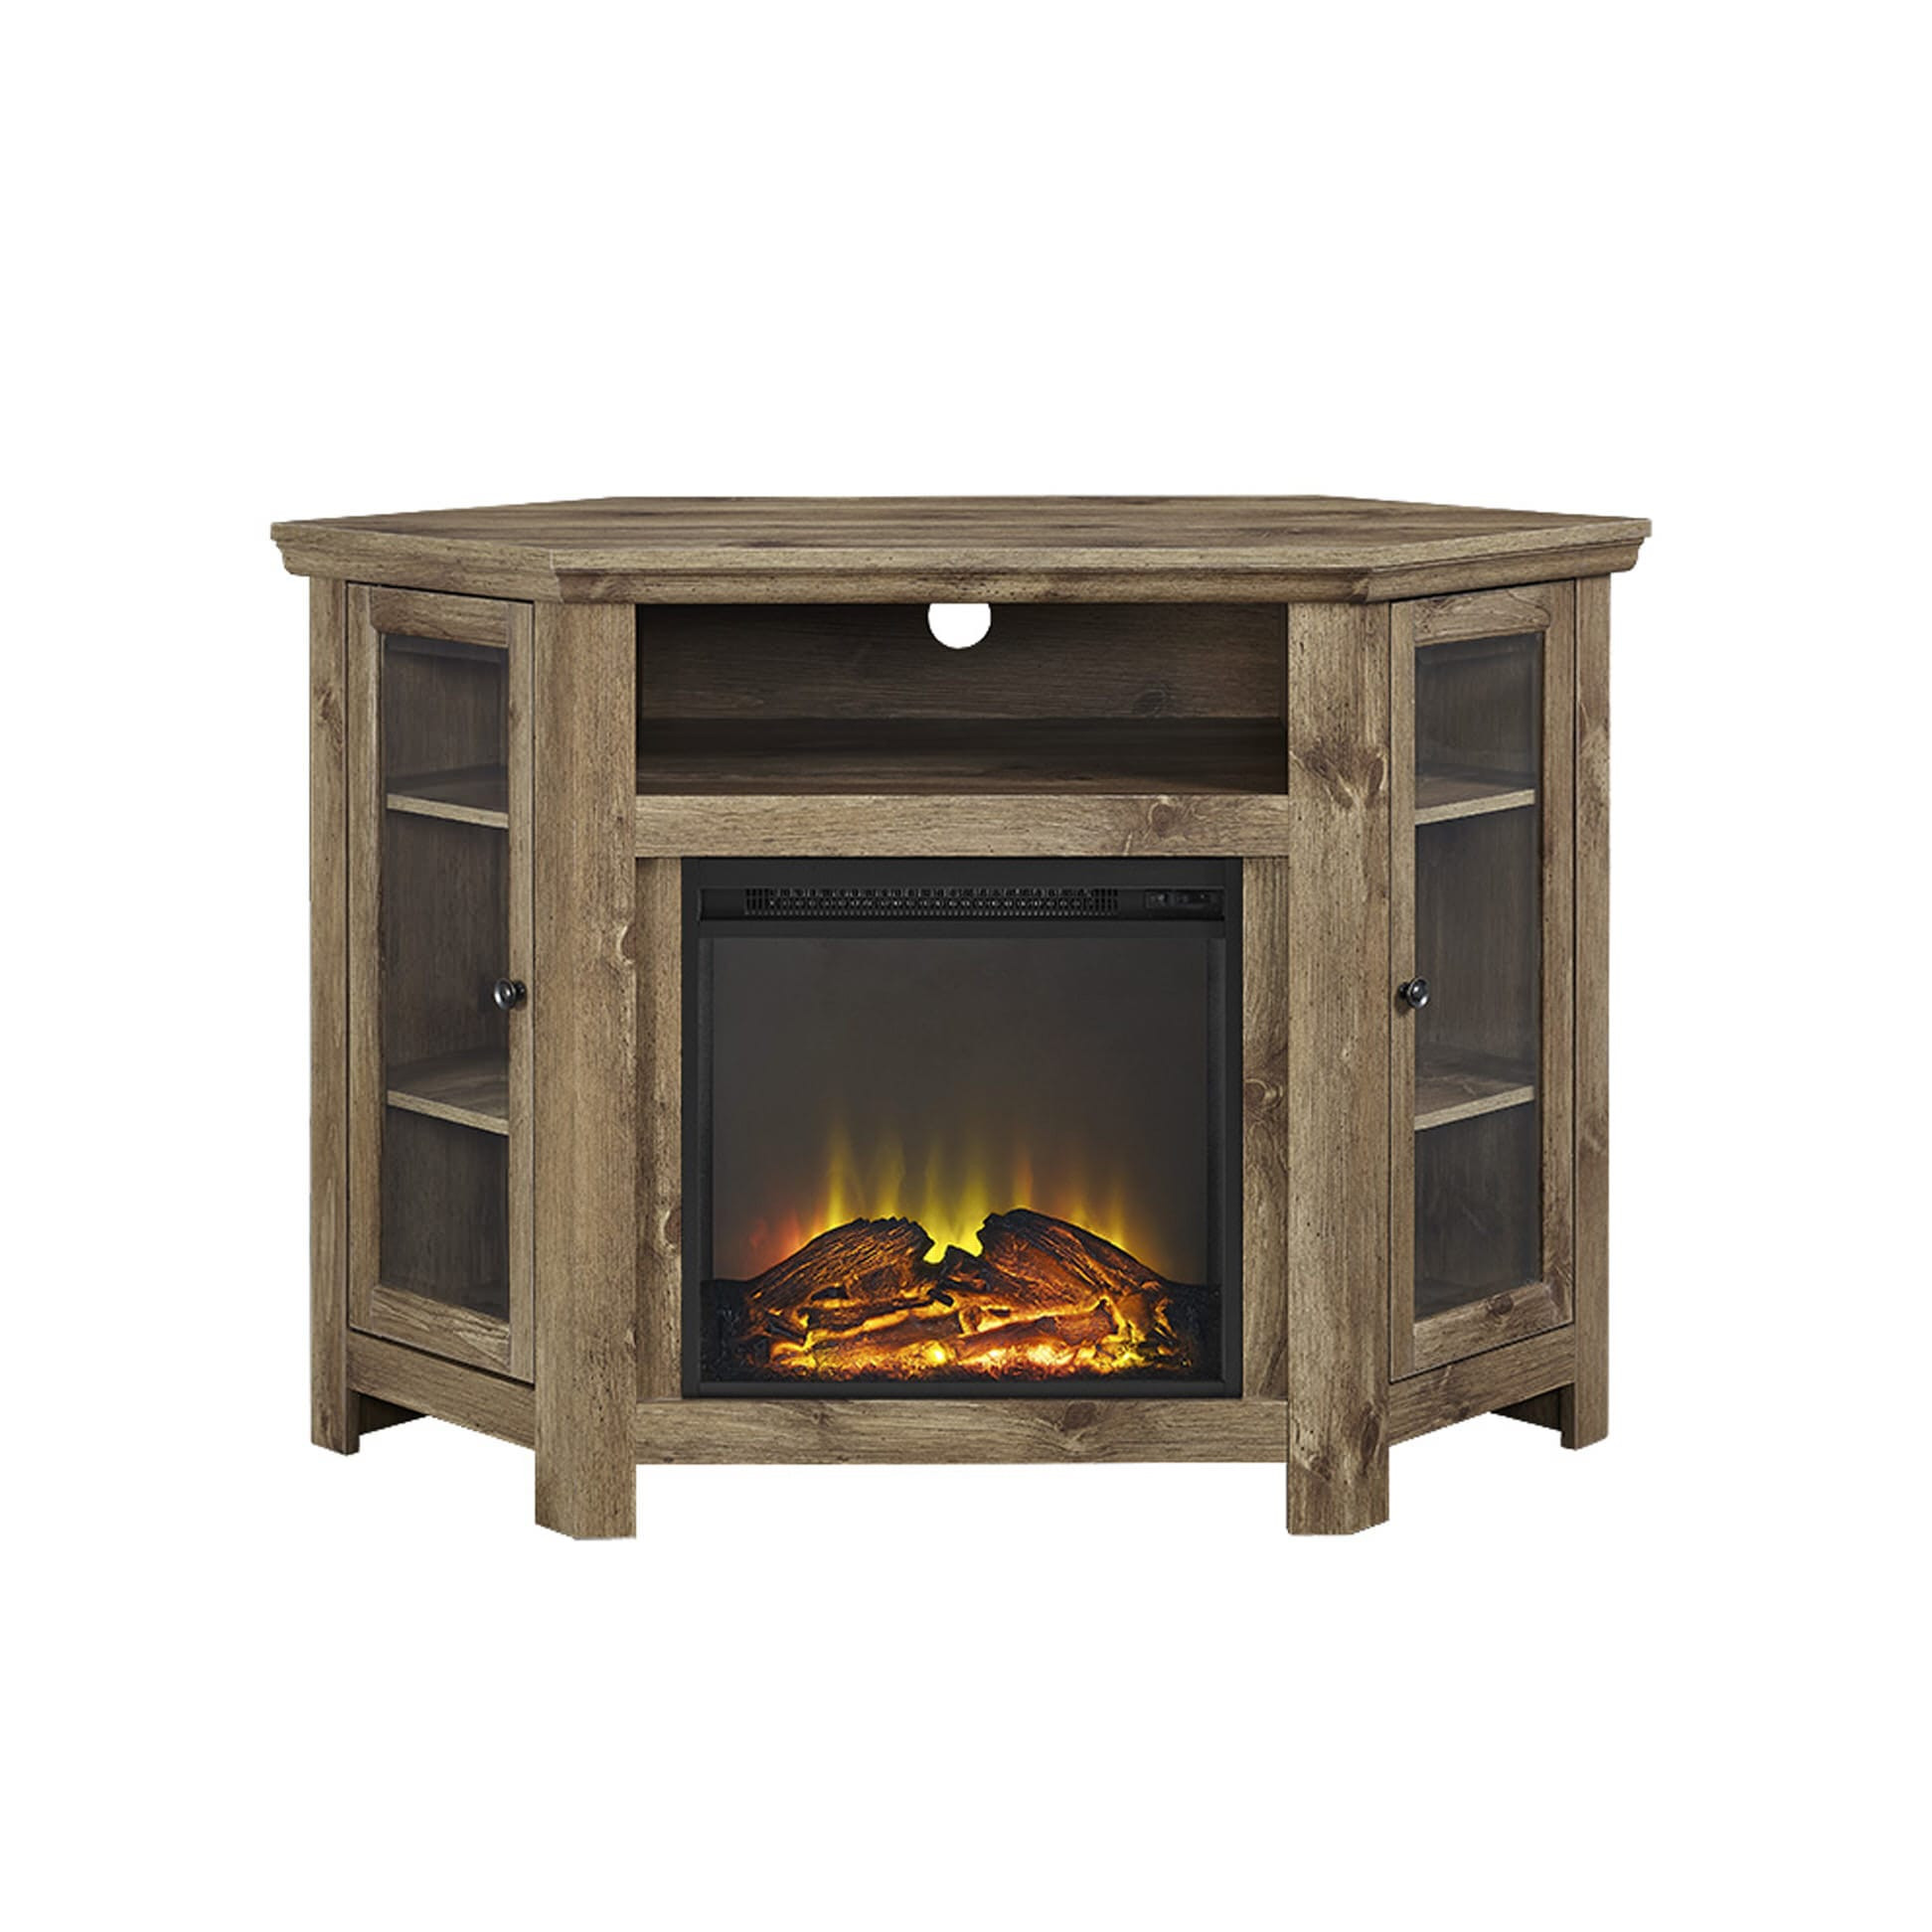 48 Inch Electric Fireplace
 Jackson 48 Inch Corner Fireplace TV Stand Barnwood by